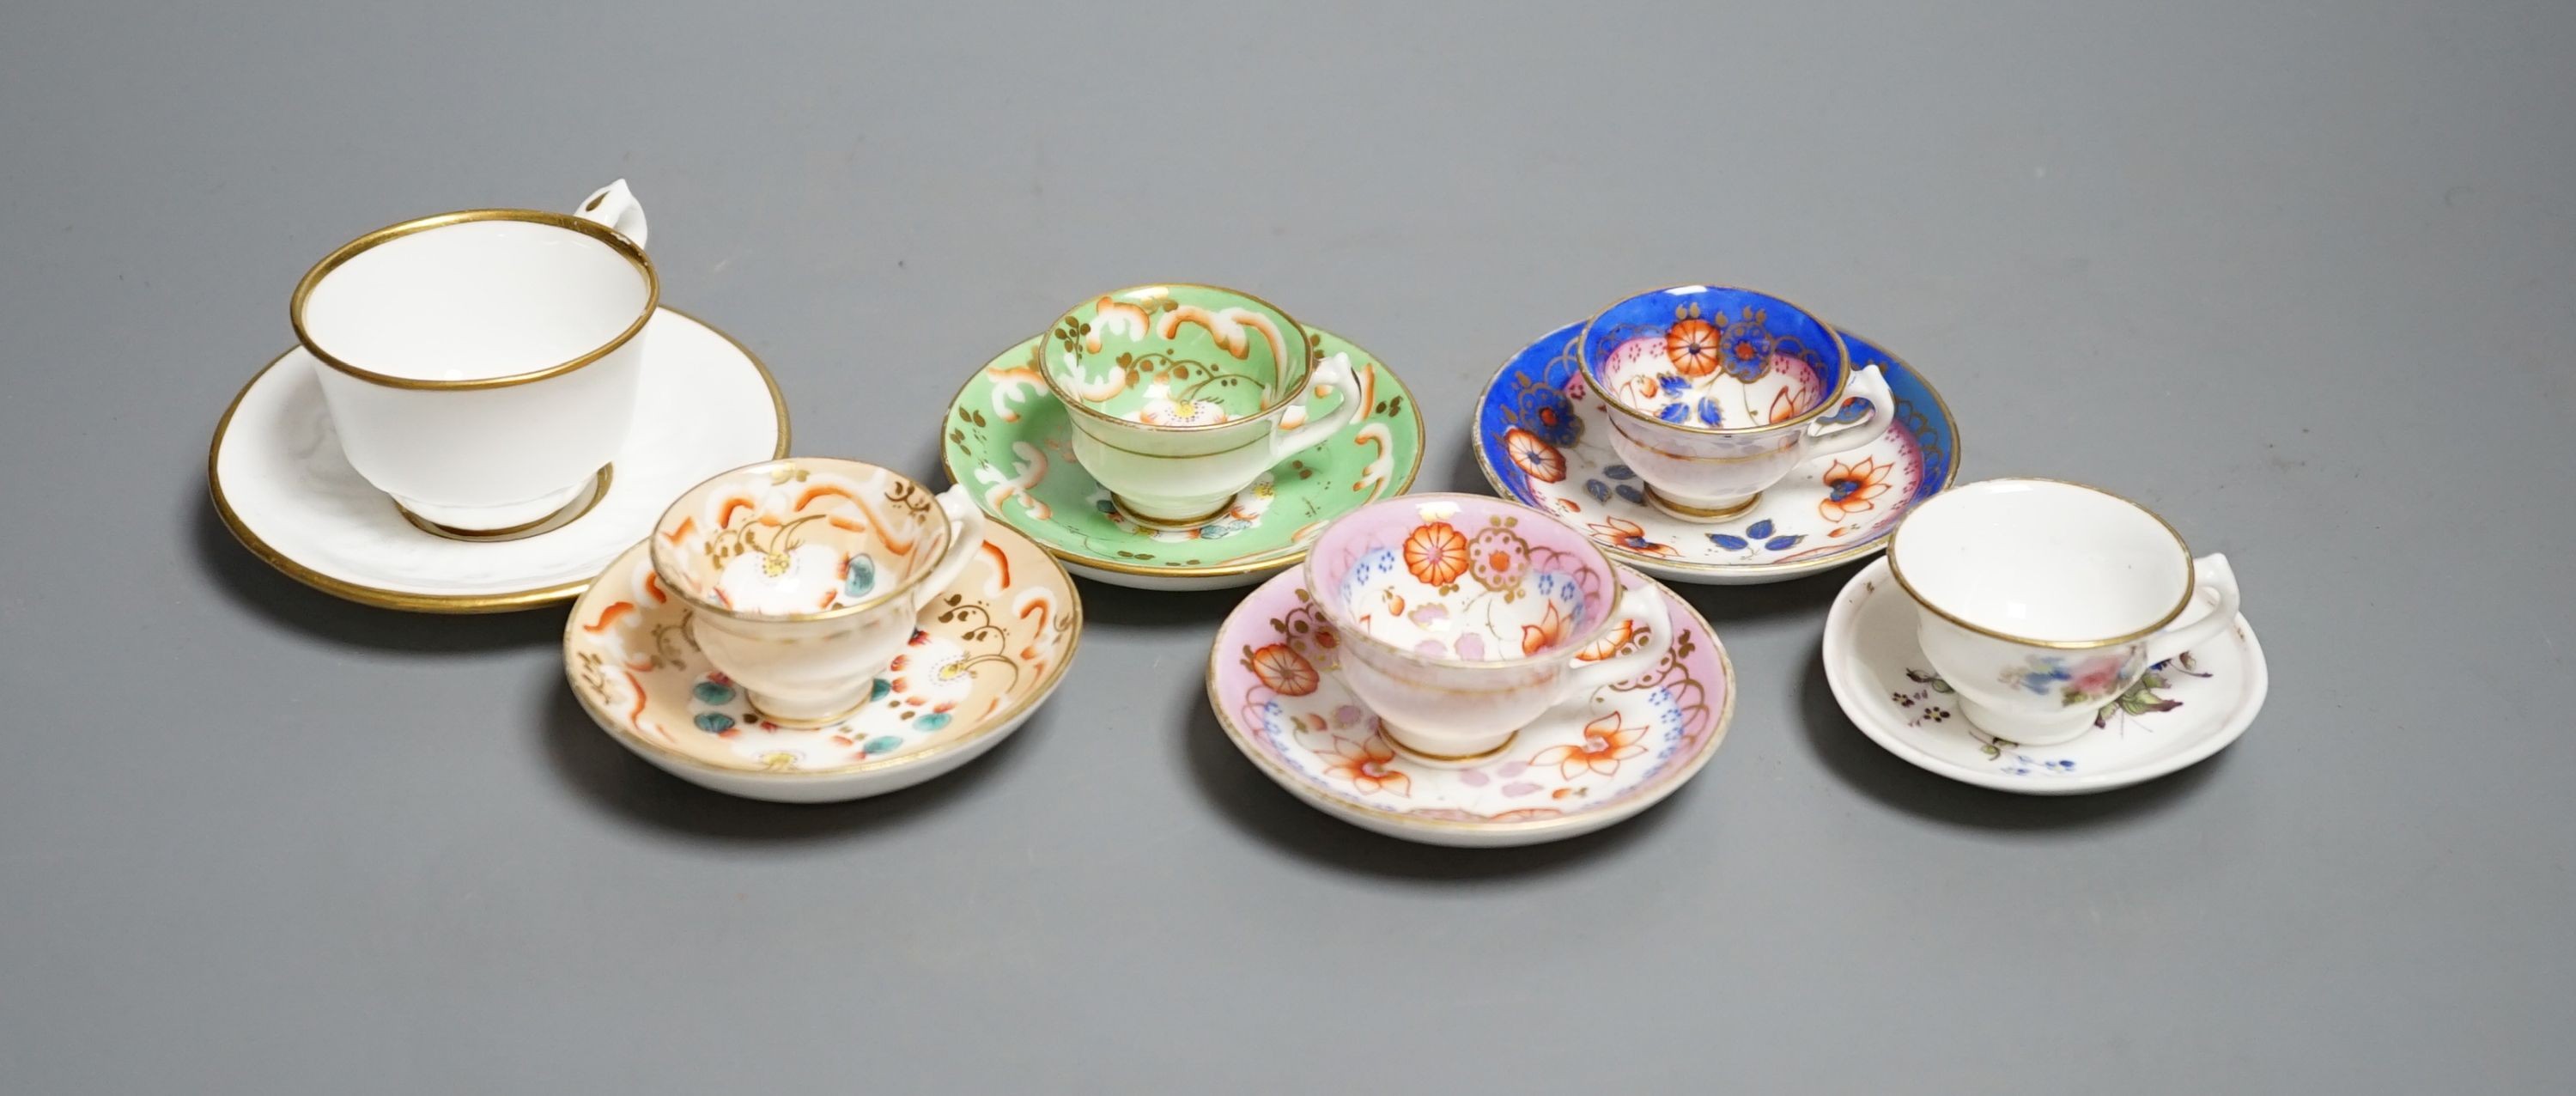 Five Staffordshire miniature teacups and saucers, possibly Alcock and a Hicks & Meigh miniture teacup and saucer, c. 1820. Provenance - Mona Sattin collection of miniature cups and saucers, collection no.s 135, 138-141,